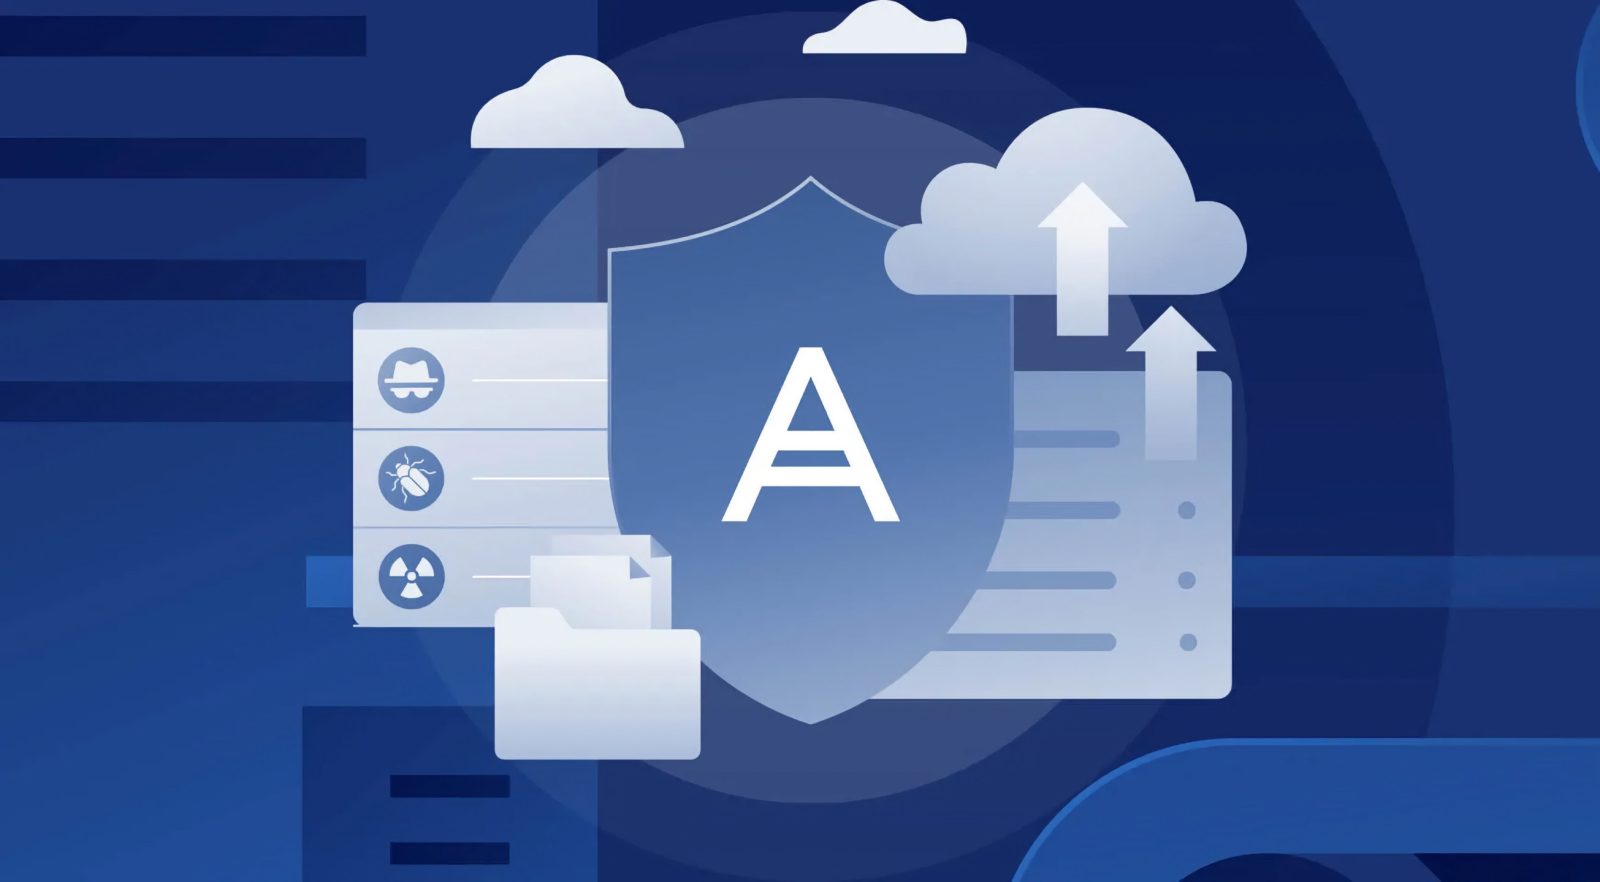 Acronis Cyber Protect Home Office provides advanced anti-malware protection for your Mac